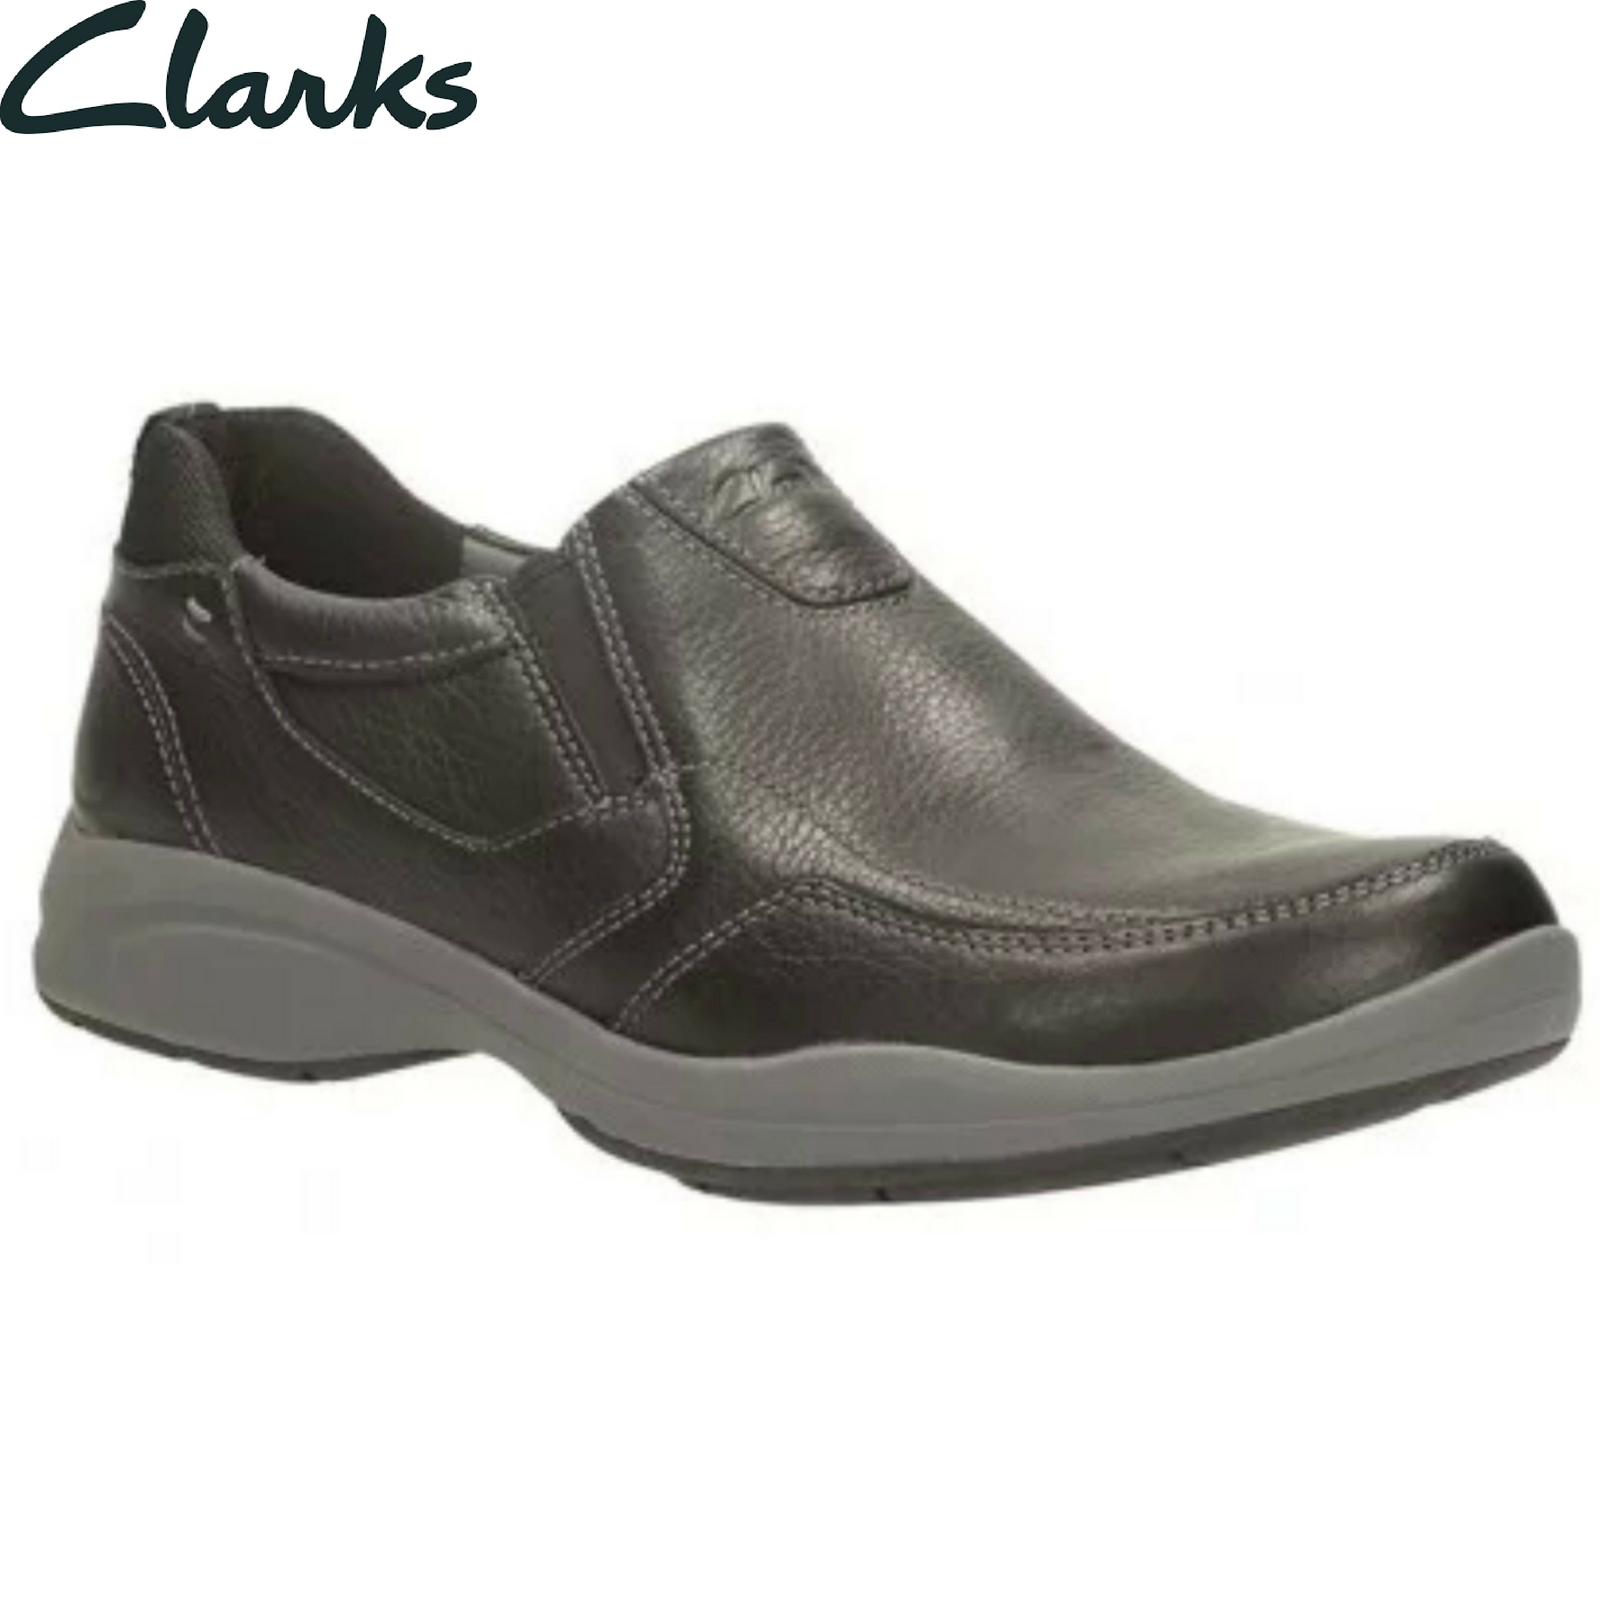 clarks shoes 13291